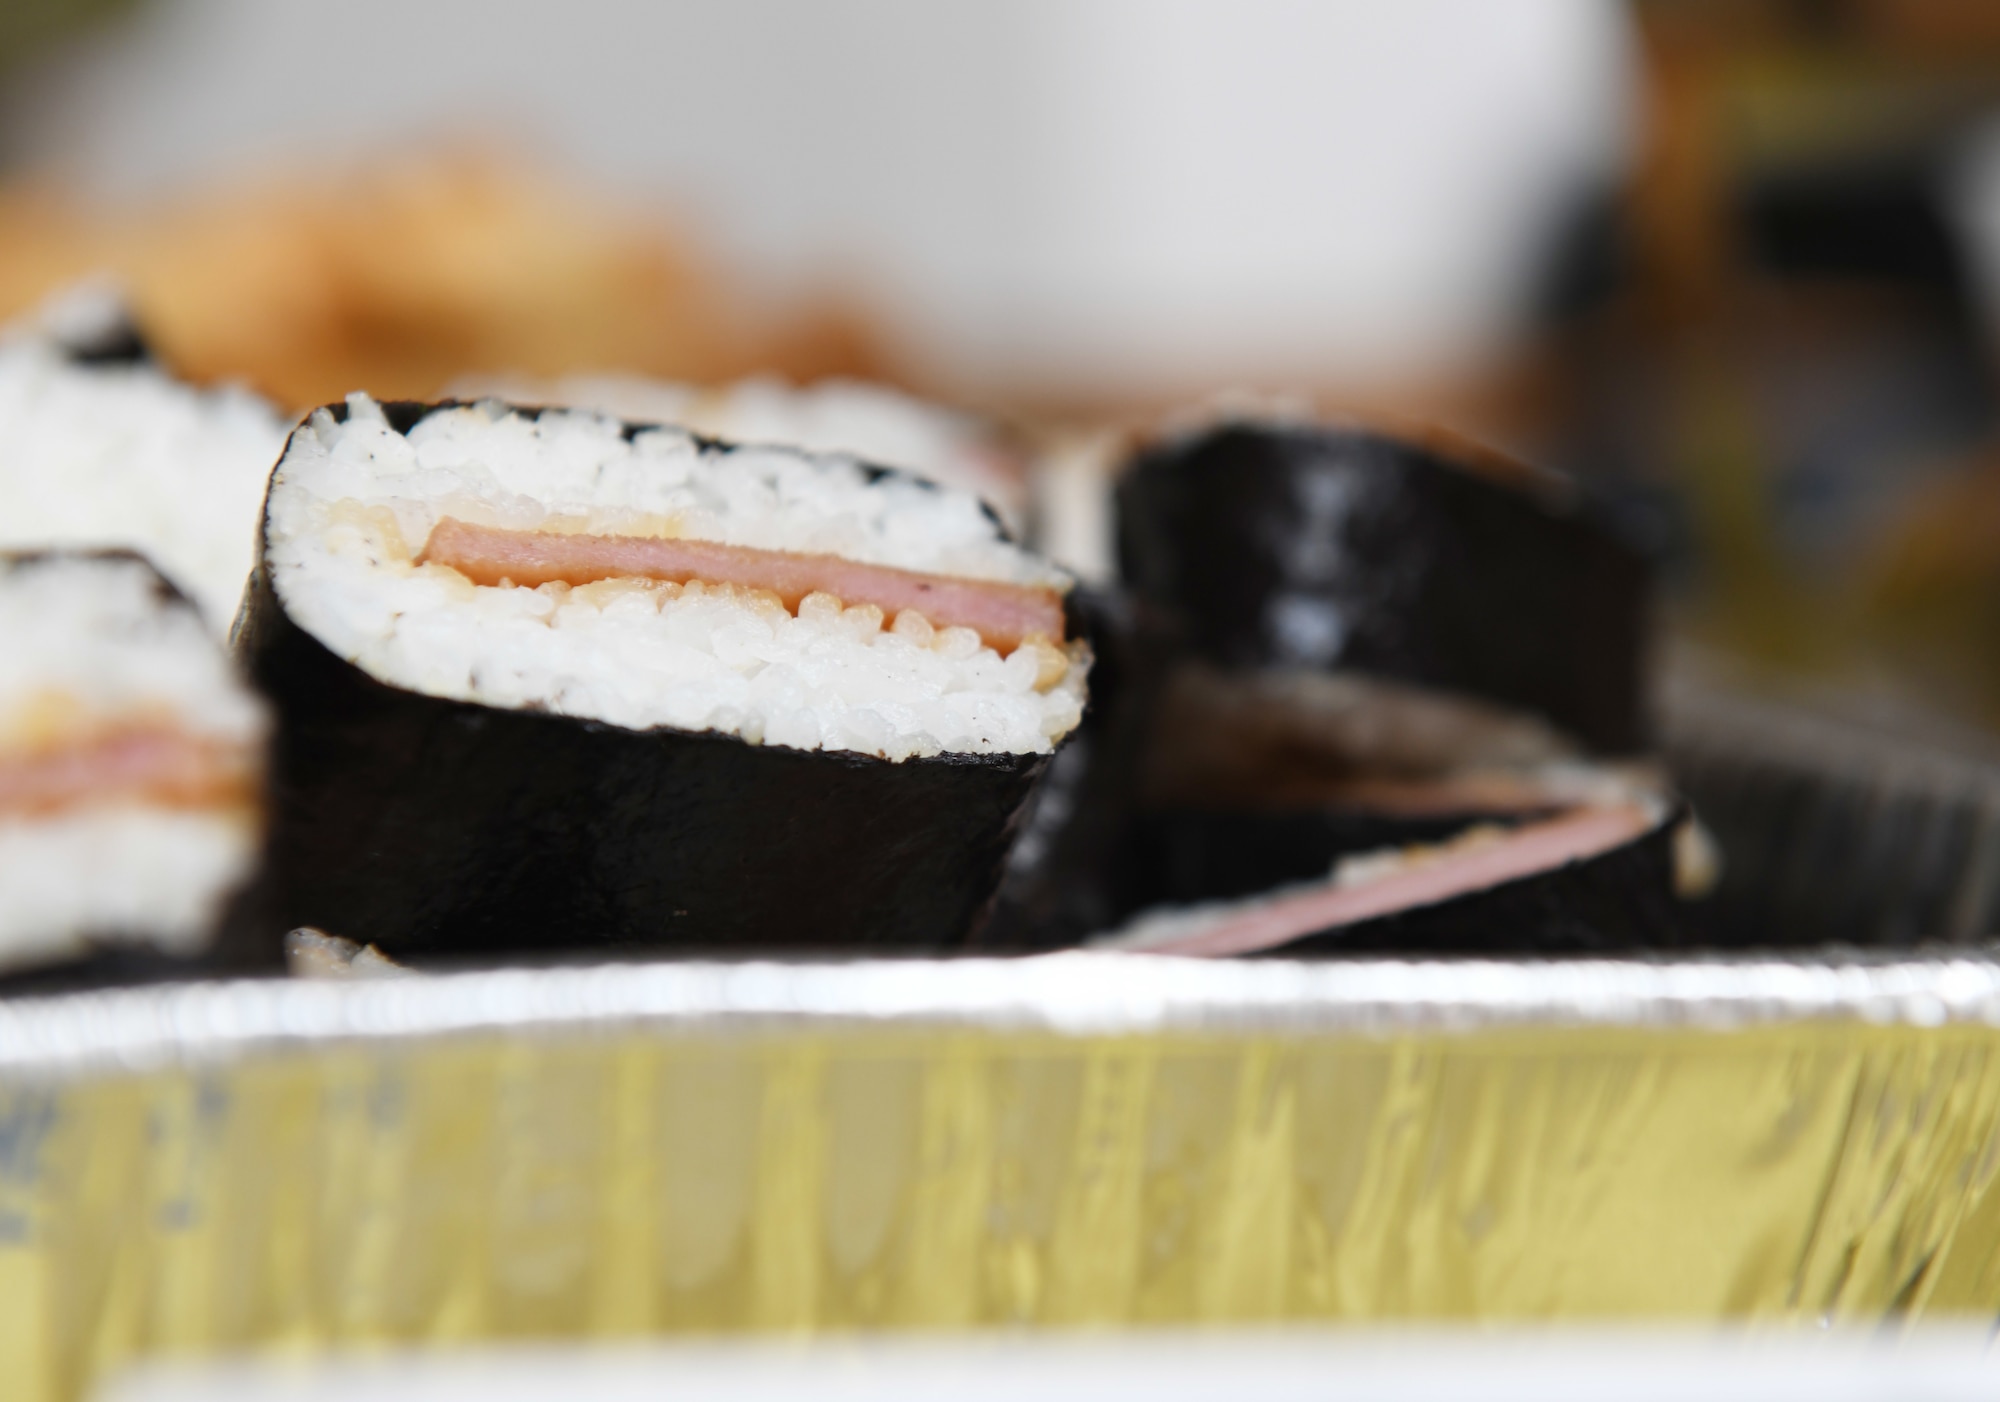 Spam musubi, a popular Hawaiian food, is prepared for consumption during a food tasting event at Ellsworth Air Force Base, S.D., May 3, 2019. Multiple different dishes were served at the Asian Pacific American Heritage Month celebration at The Exchange on base. (U.S. Air Force photo by Senior Airman Thomas Karol)